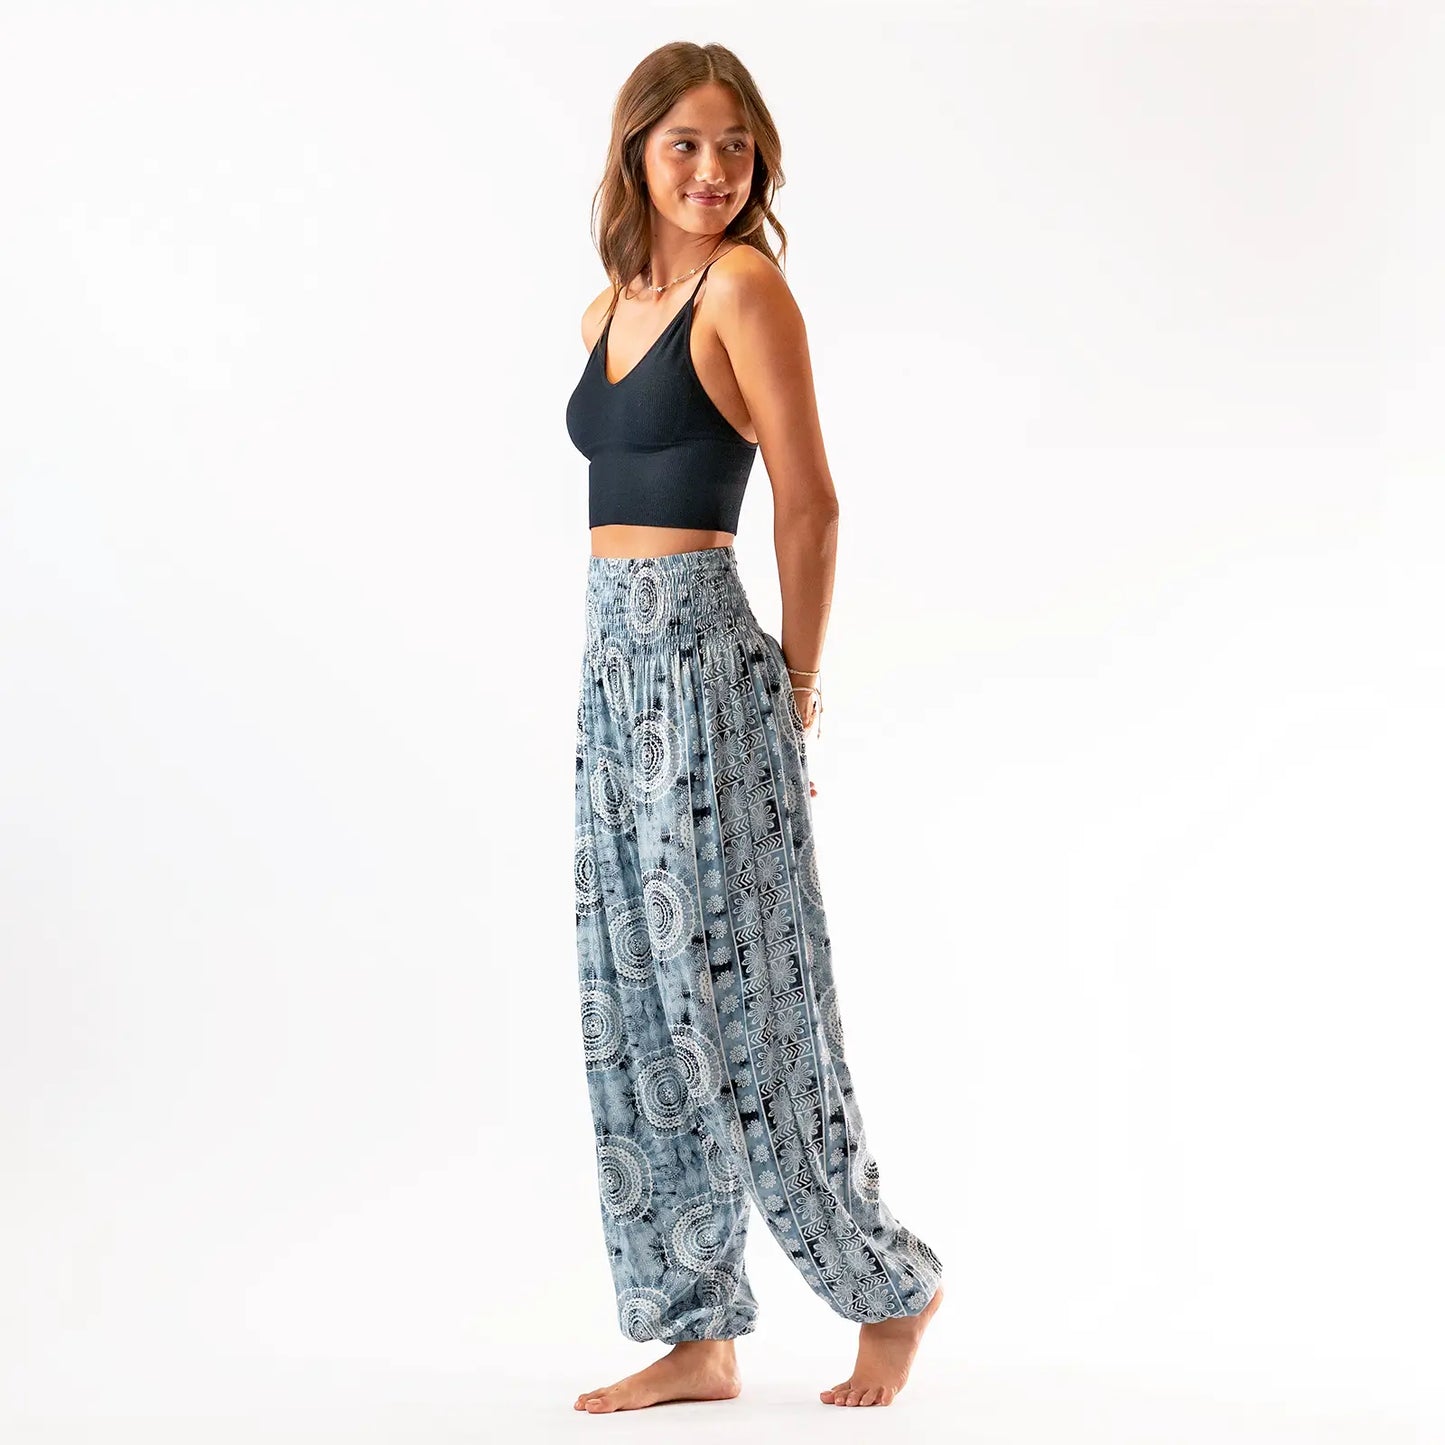 Blue Harem Pants for Women Lounge Yoga Boho Pants Beach Pants for Summer  Petite to Plus Size Pants With Two Pockets 